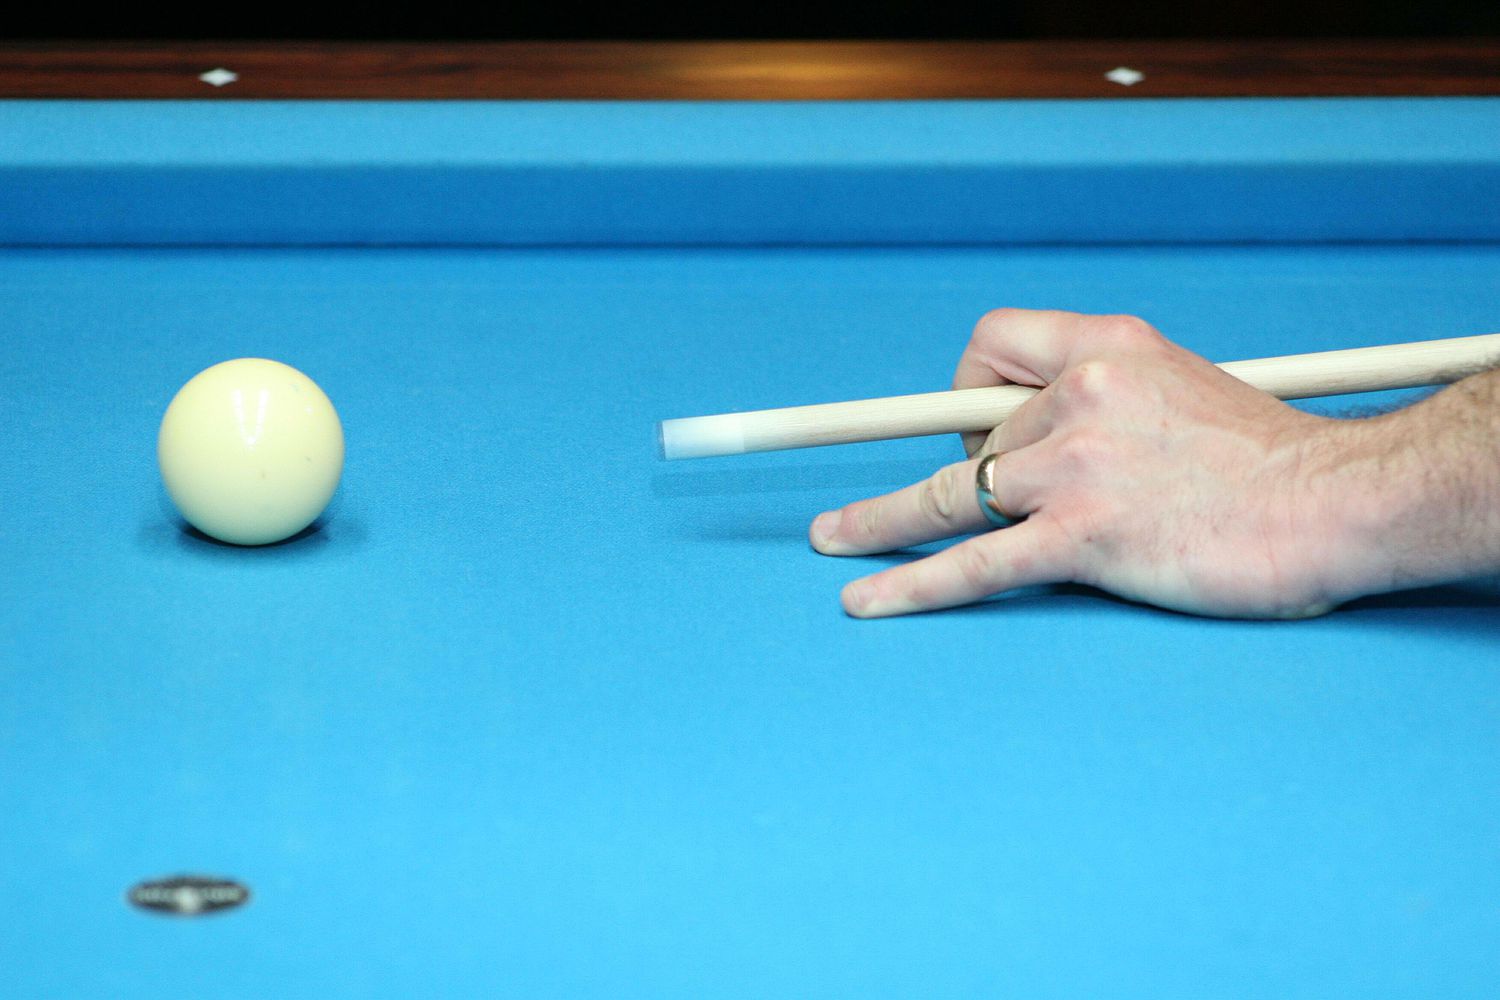 how to hold pool cue stick